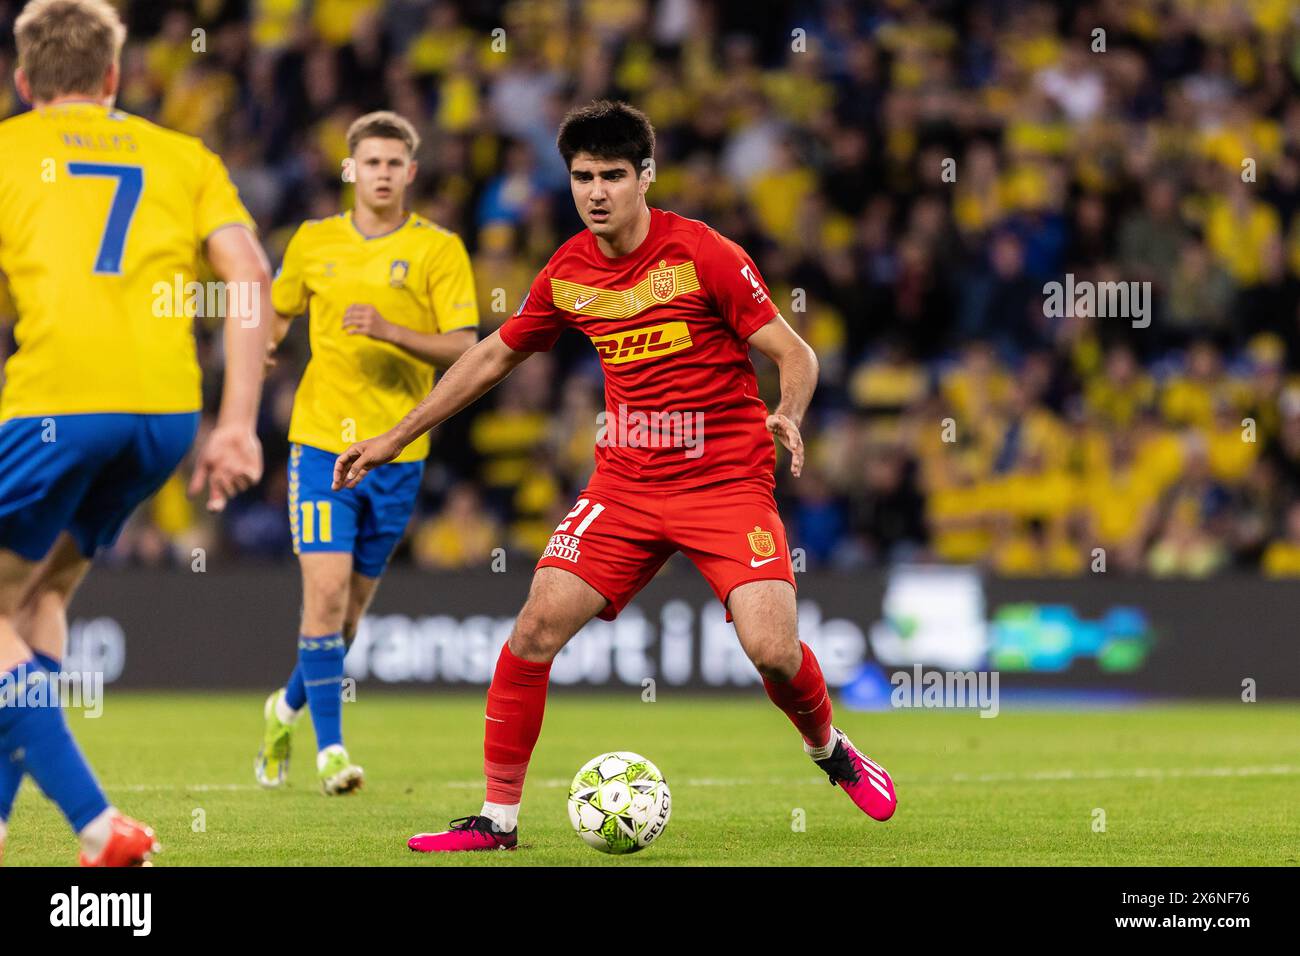 Broendby, Denmark. 15th May, 2024. Zidan Sertdemir (21) of FC Nordsjaelland seen during the 3F Superliga match between Broendby IF and FC Nordsjaelland at Broendby Stadion in Broendby. (Photo Credit: Gonzales Photo/Alamy Live News Stock Photo